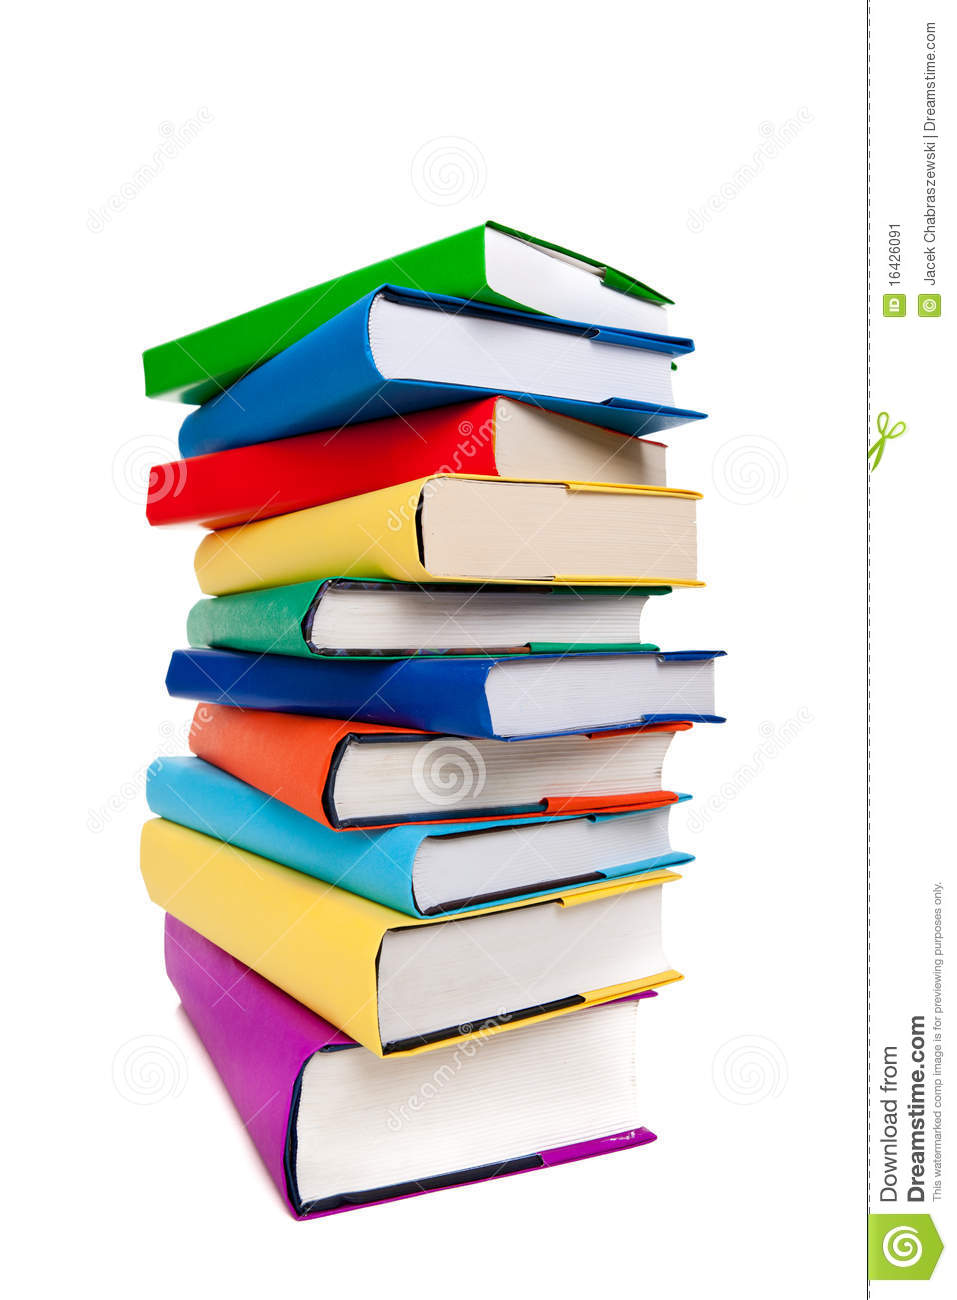 Stack Of Books Images Pile Books 16426091 Jpg